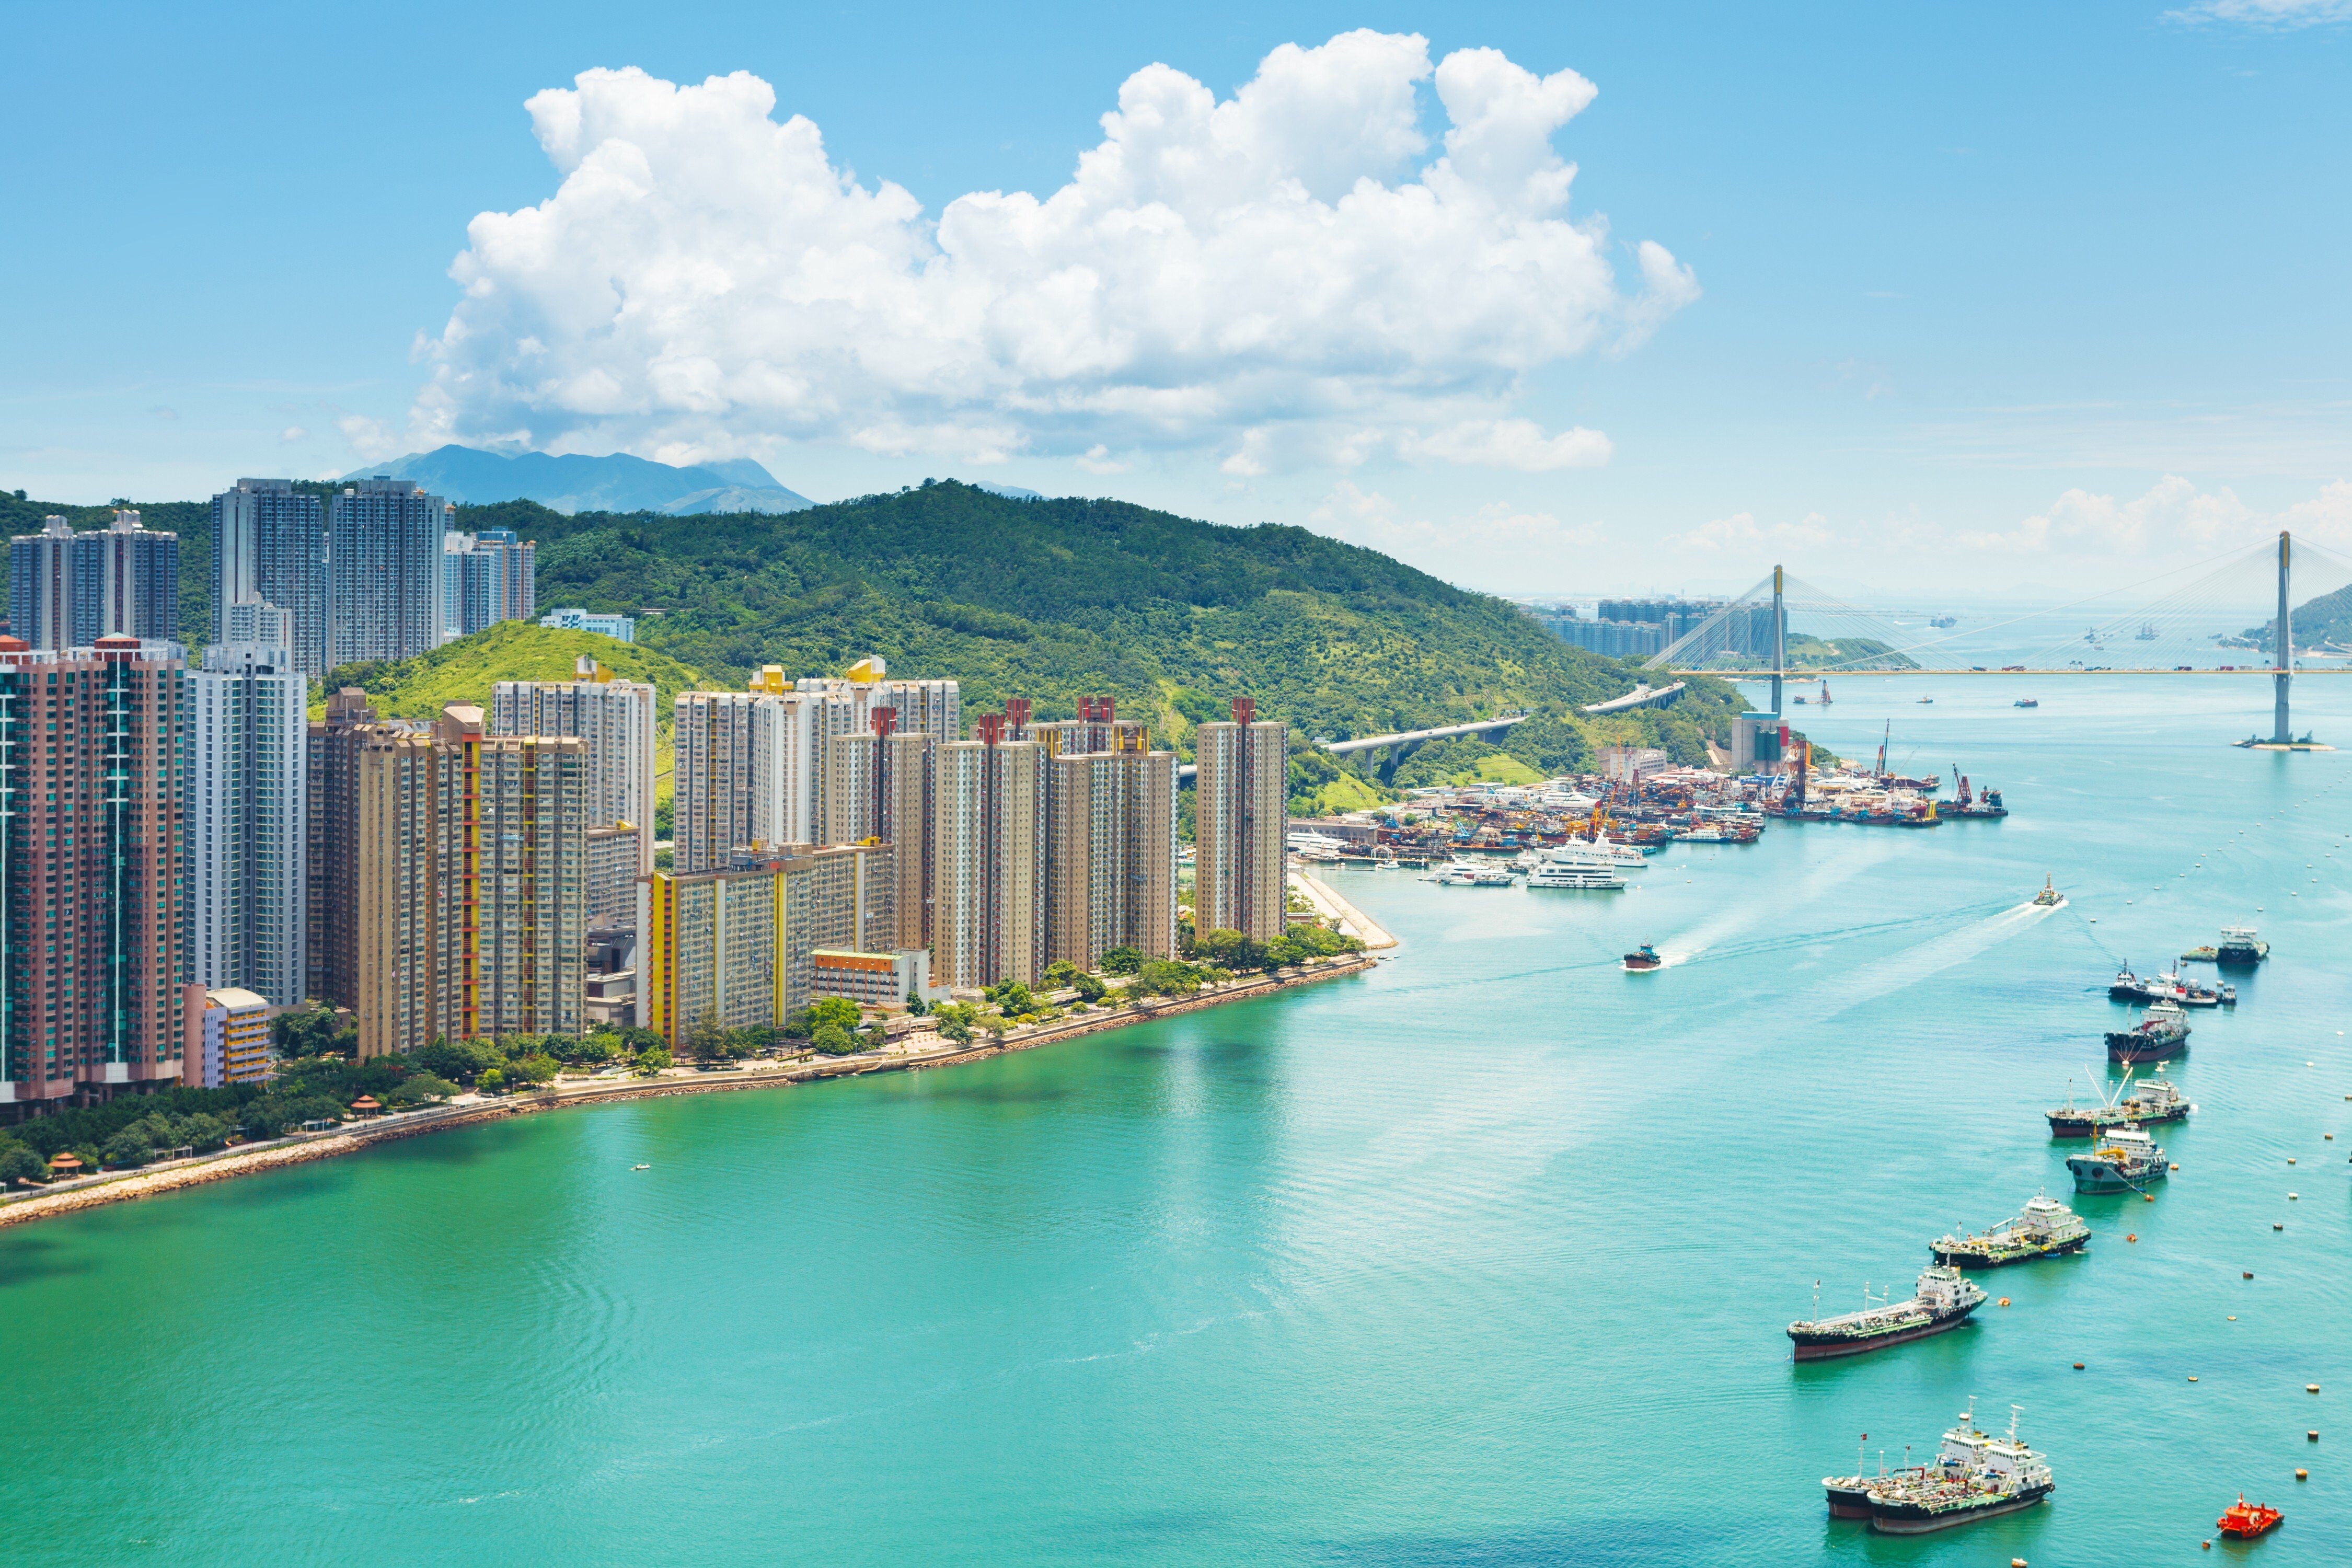 Kwai Tsing is likely to see significant change in land use in coming years. Photo: Getty Images/iStockphoto